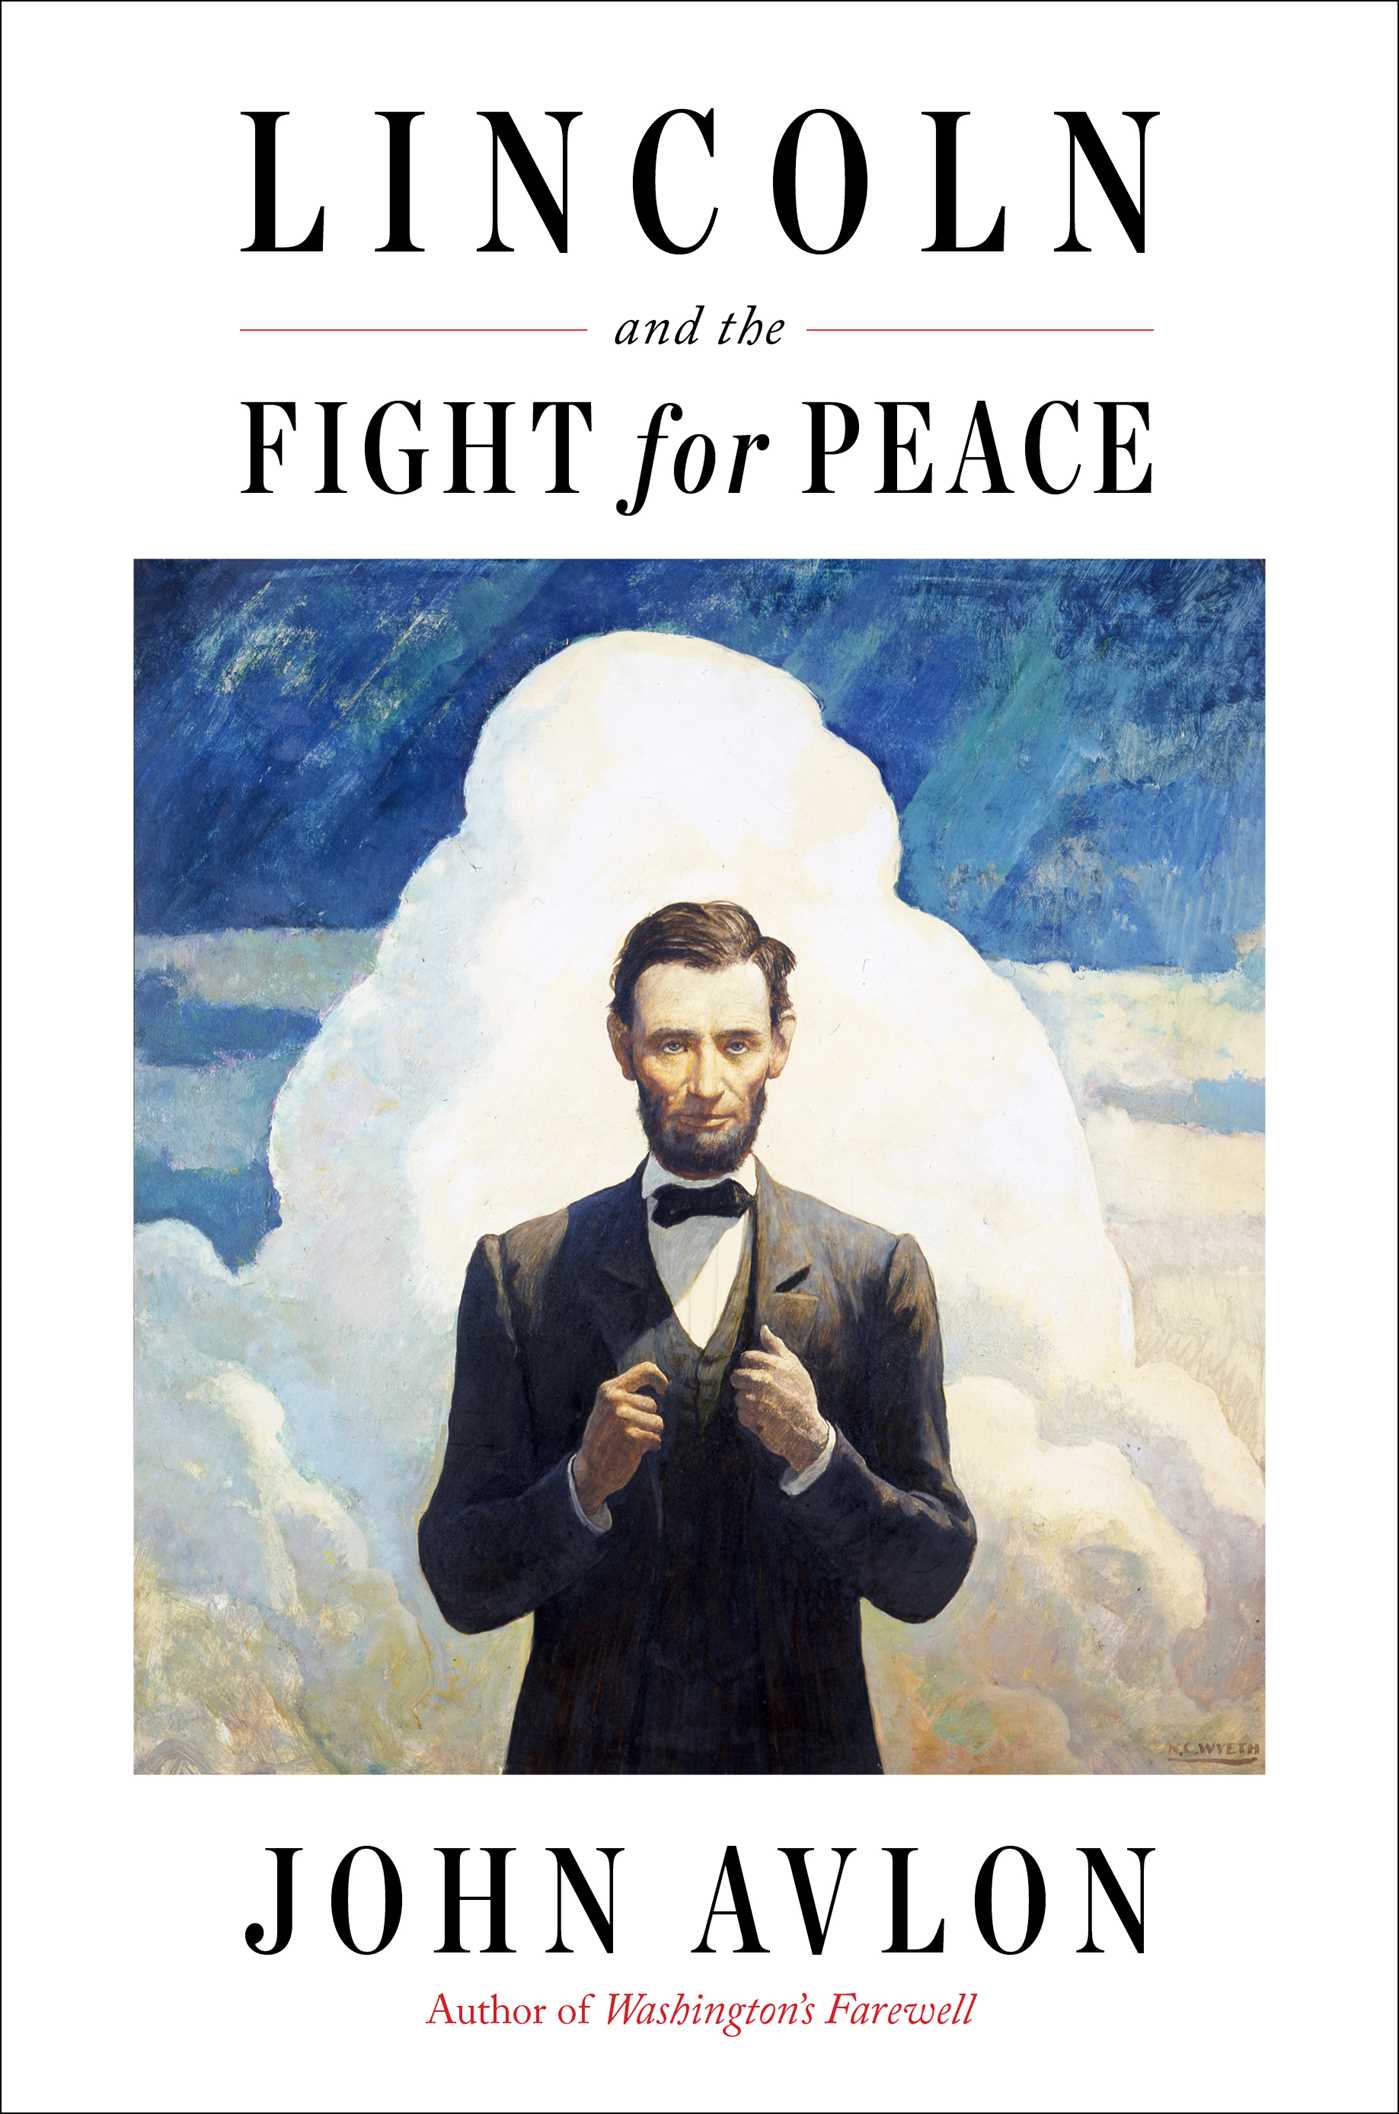 Image for "Lincoln and the Fight for Peace"